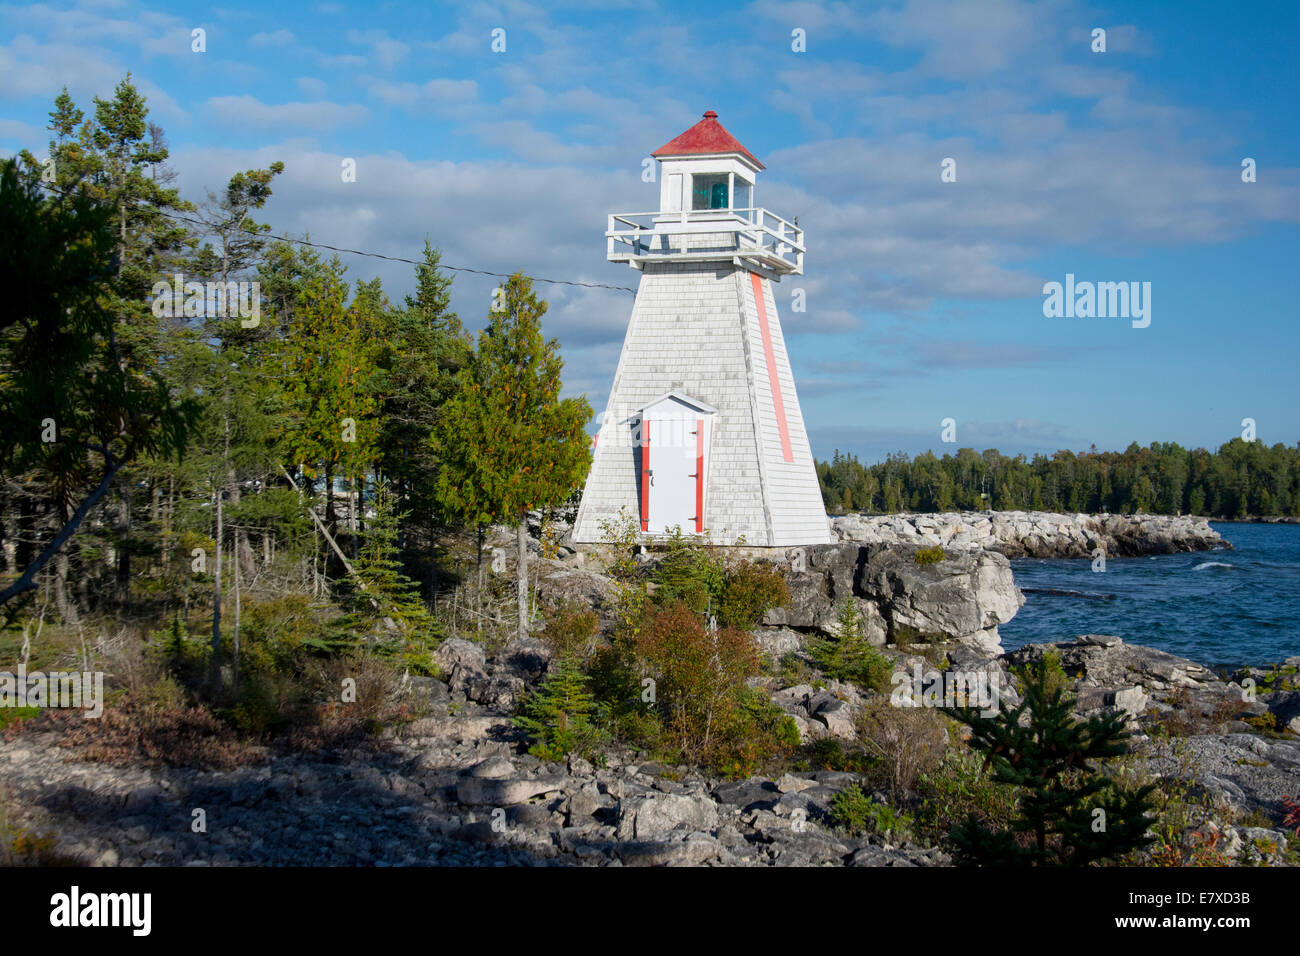 The lighthouse at South Baymouth, Manitoulin Island, Ontario, Canada. Stock Photo